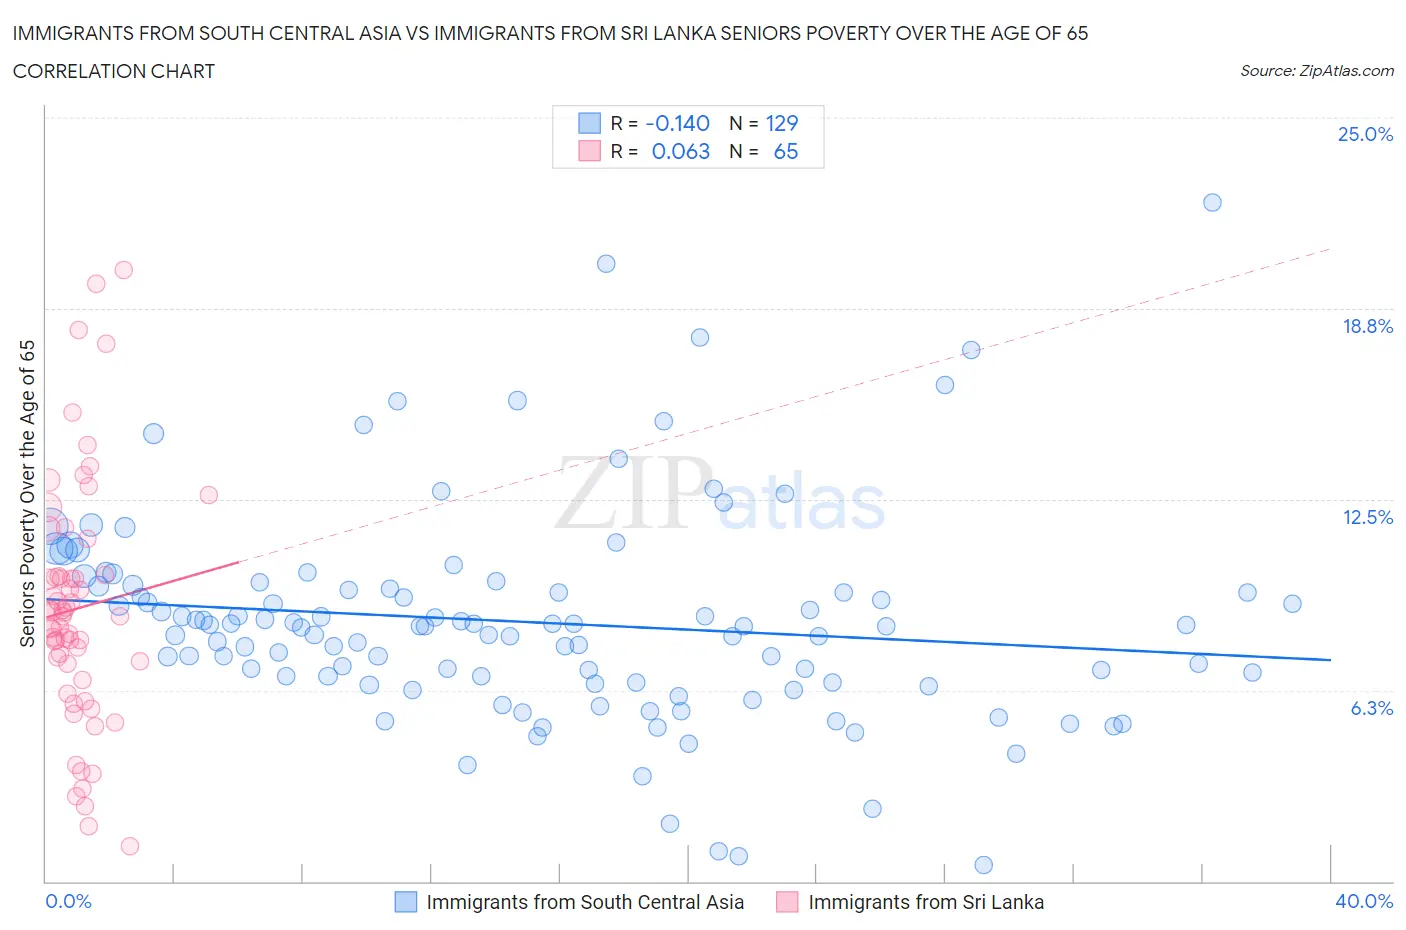 Immigrants from South Central Asia vs Immigrants from Sri Lanka Seniors Poverty Over the Age of 65